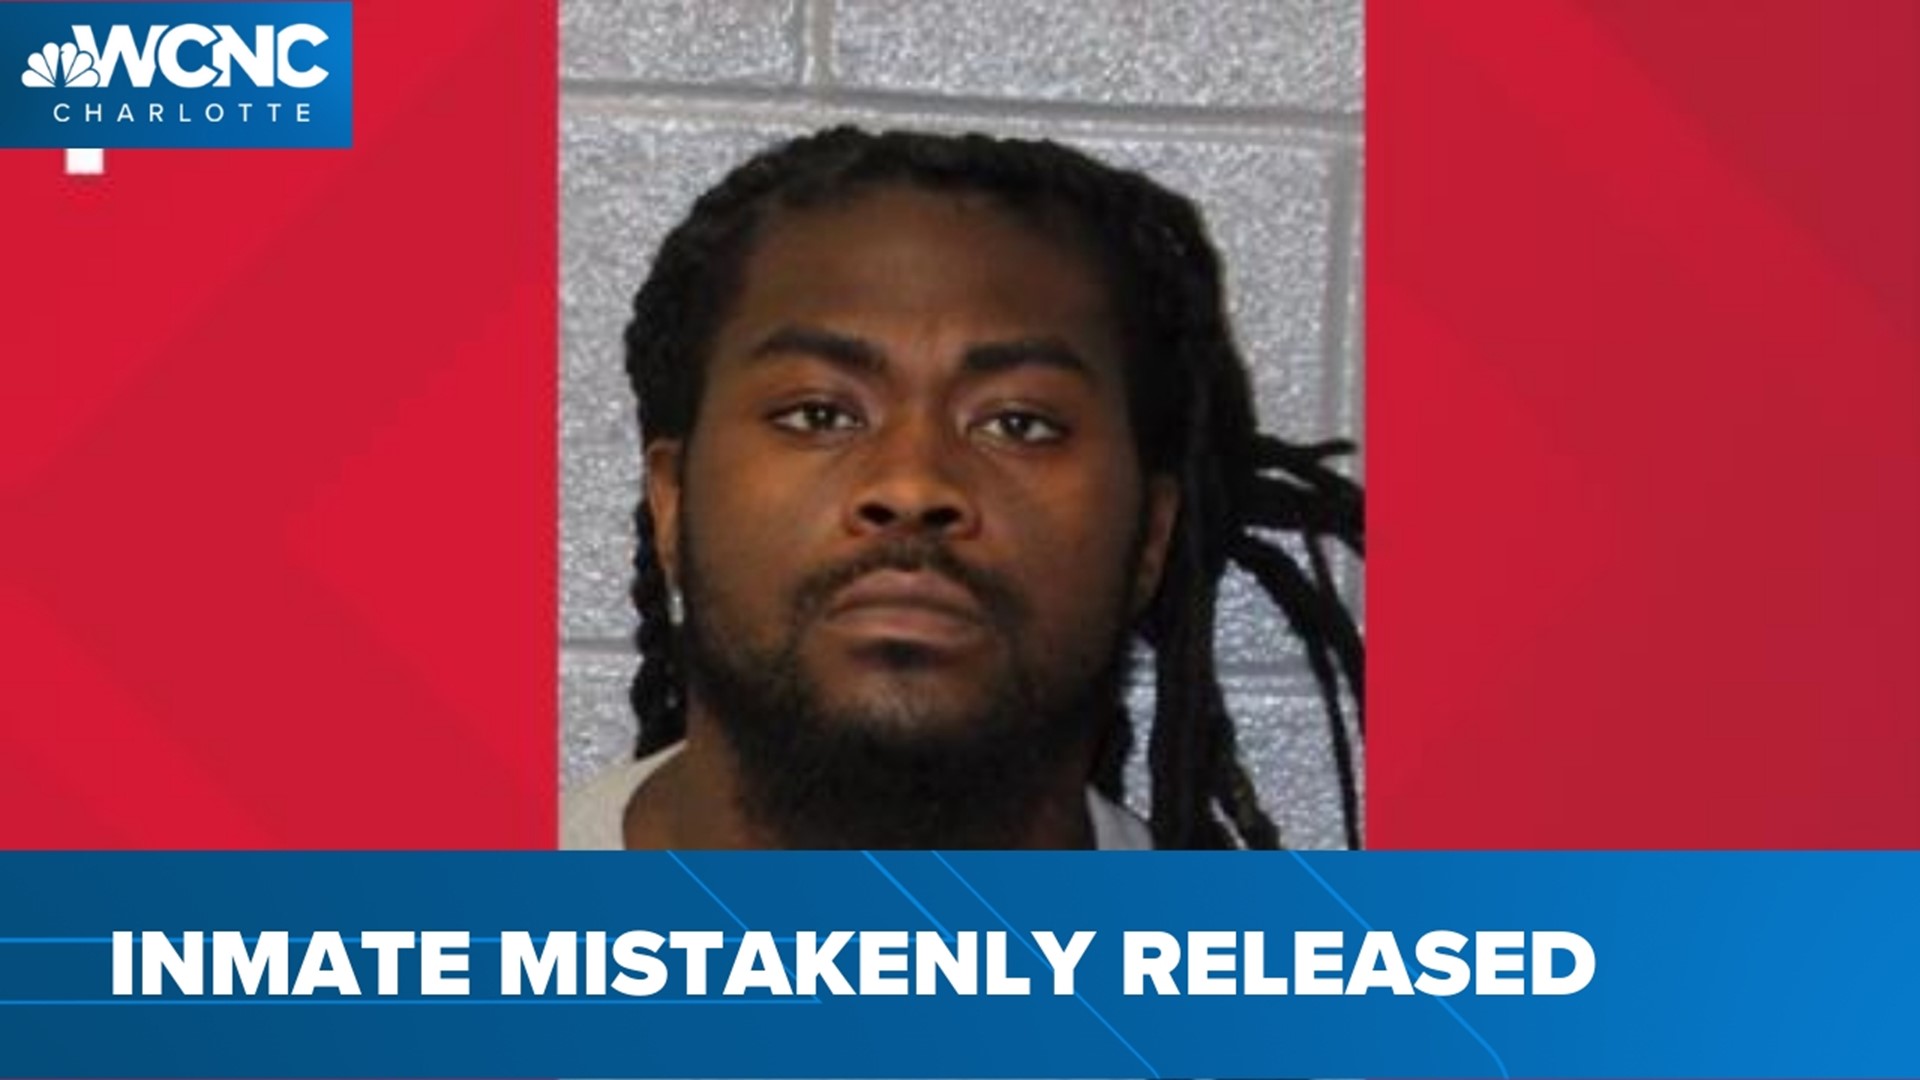 Deputies say he was erroneously released on May 9.